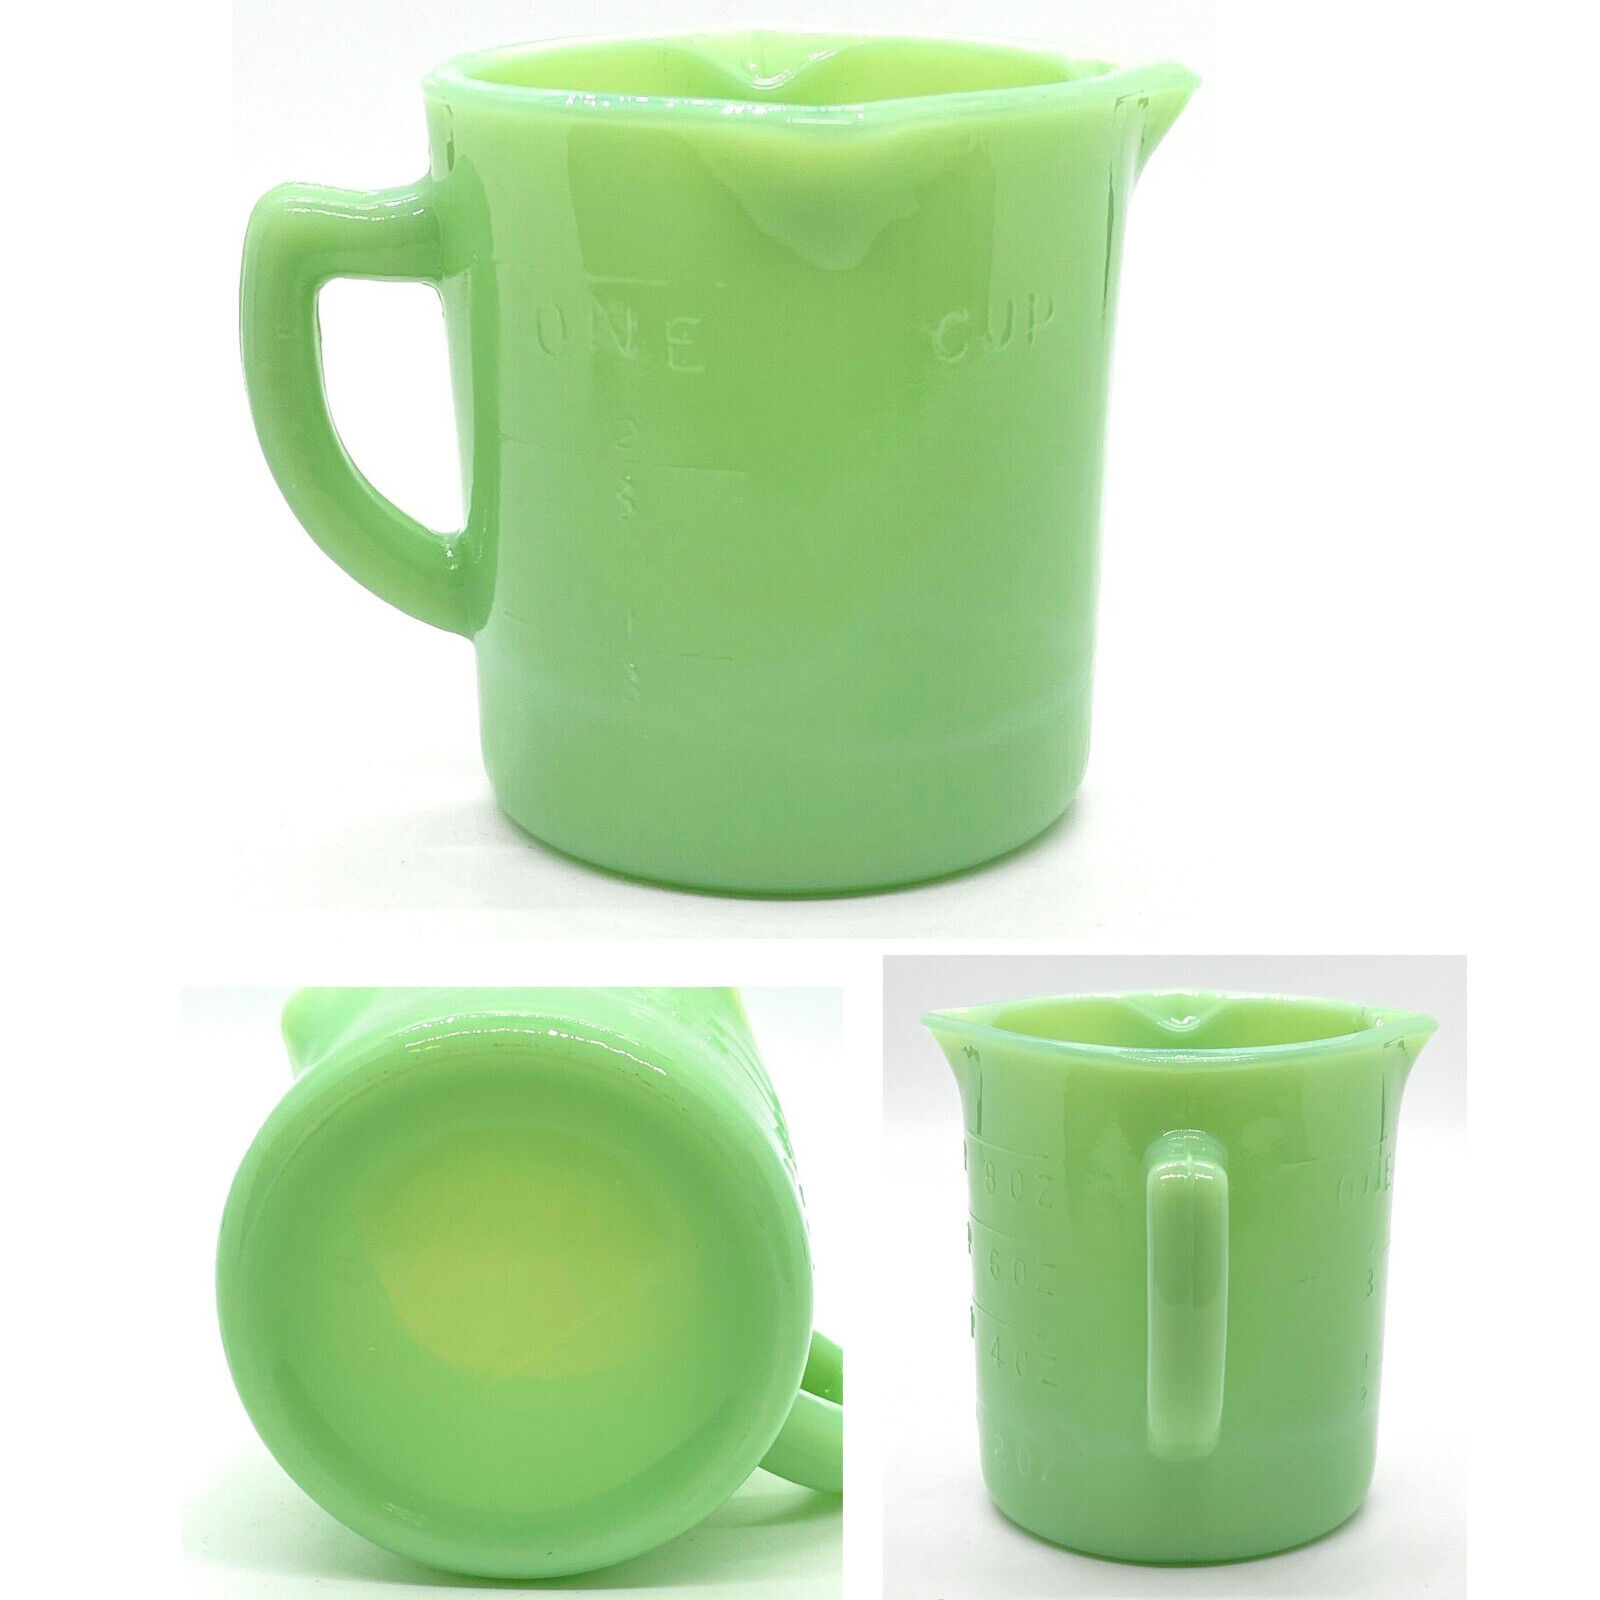 NEW Depression Style Jadeite Green Jadite Glass 1 c Measuring Cup 3 Pour Spouts